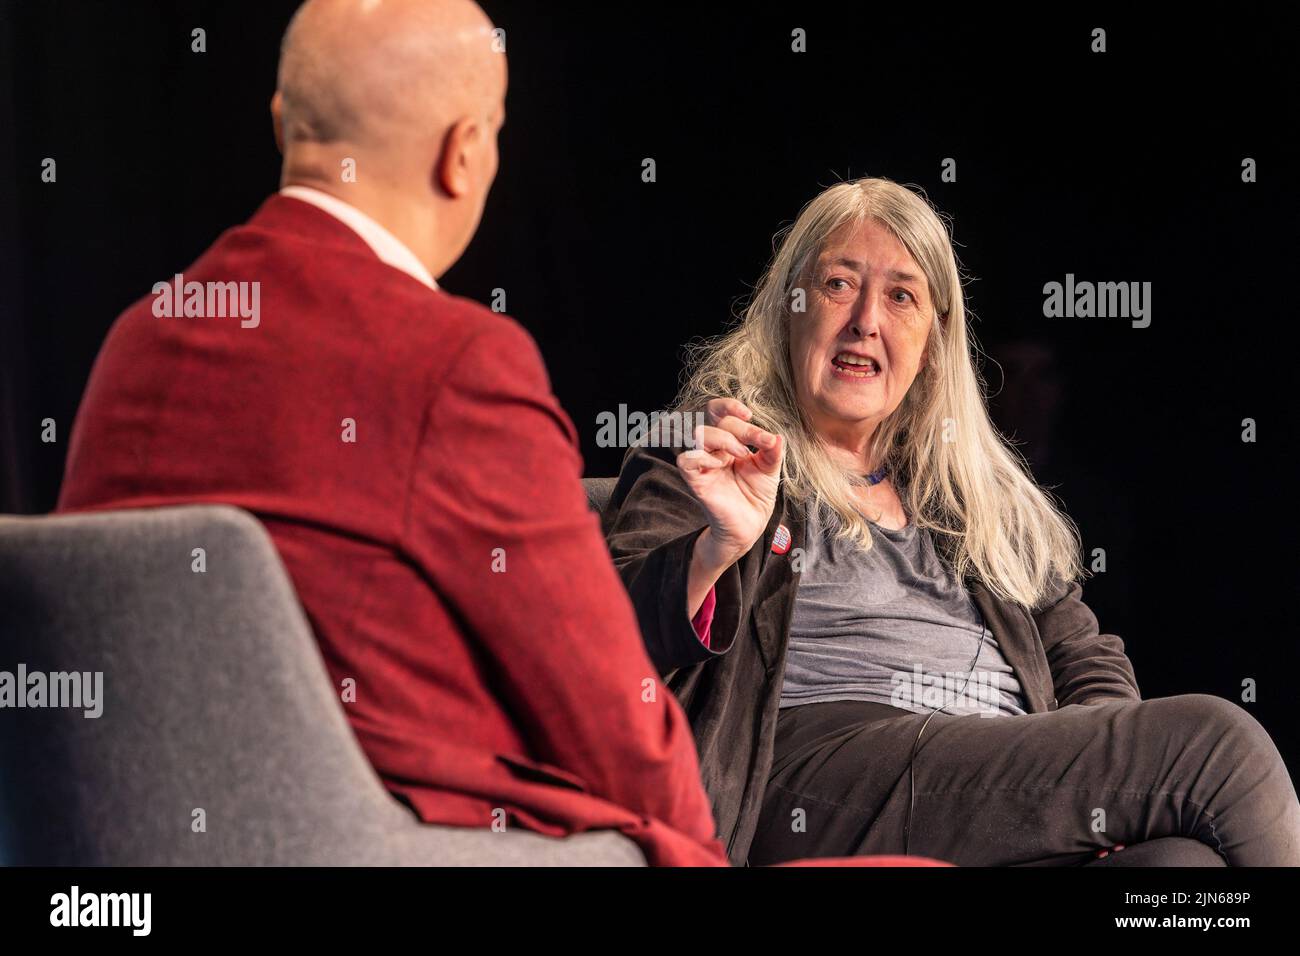 Edinburgh, United Kingdom. 09 August, 2022 Pictured: Professor Dame Mary Beard, one of Britain’s best-known Classicists, is interviewed by LBC’s Iain Dale at the Edinburgh Fringe Festival as part of the All Talk series of interviews by the broadcaster. During the interview, she admitted that the politicians of the Ancient World would look at their modern-day counterparts and recognise many of the same tactics at play. Credit: Rich Dyson/Alamy Live News Stock Photo